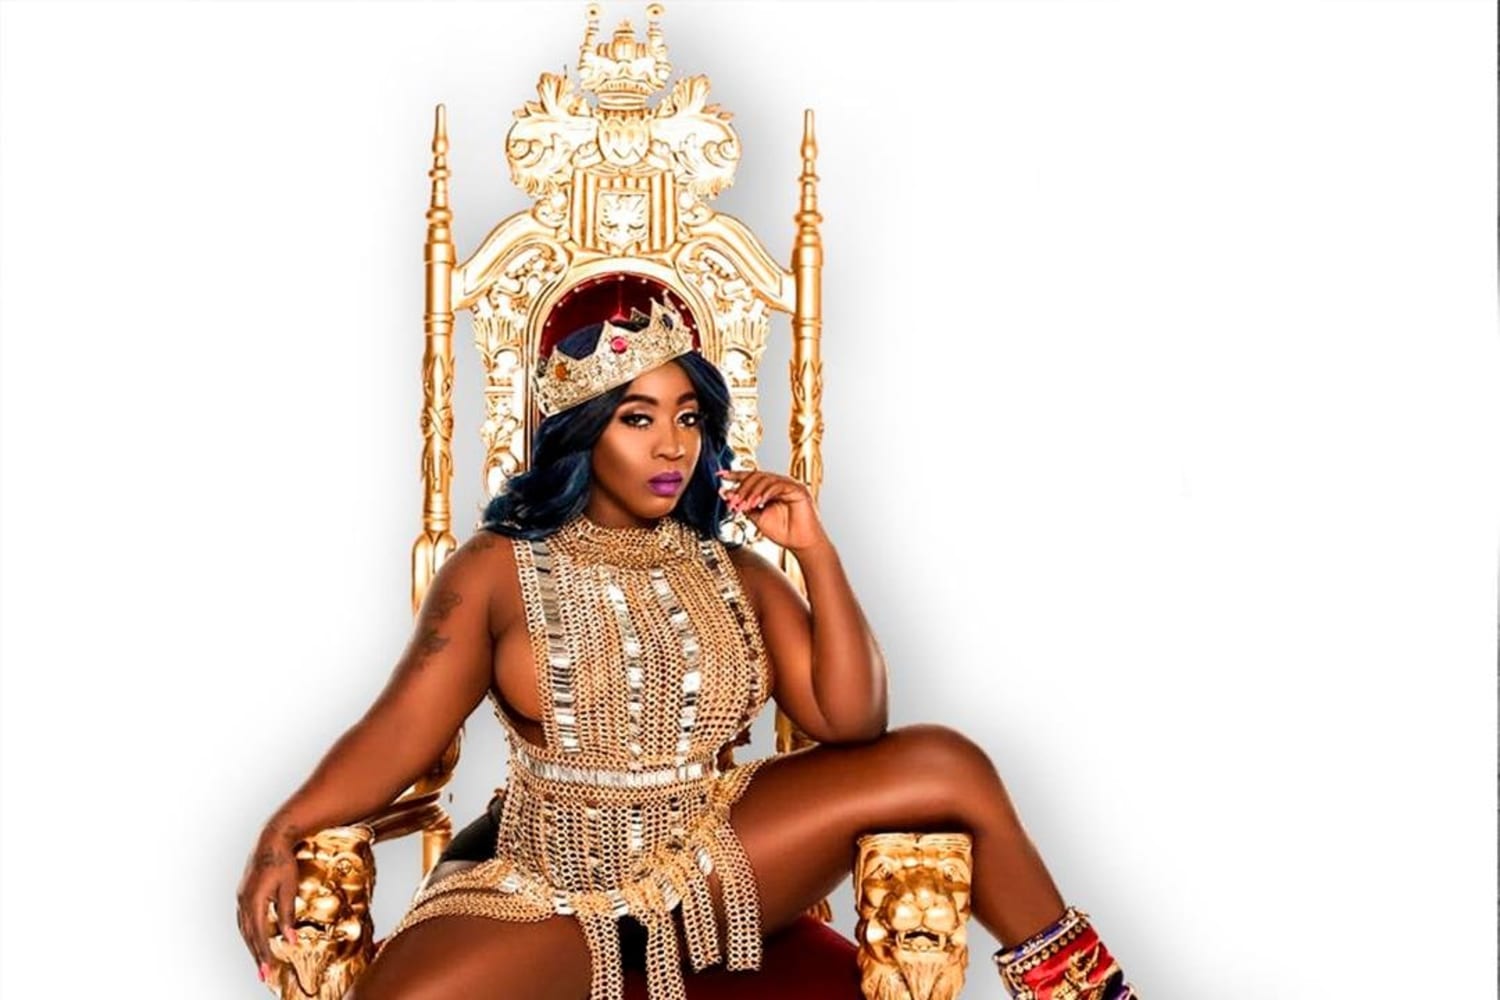 Spice: The Queen of dancehall's 9 key career moments